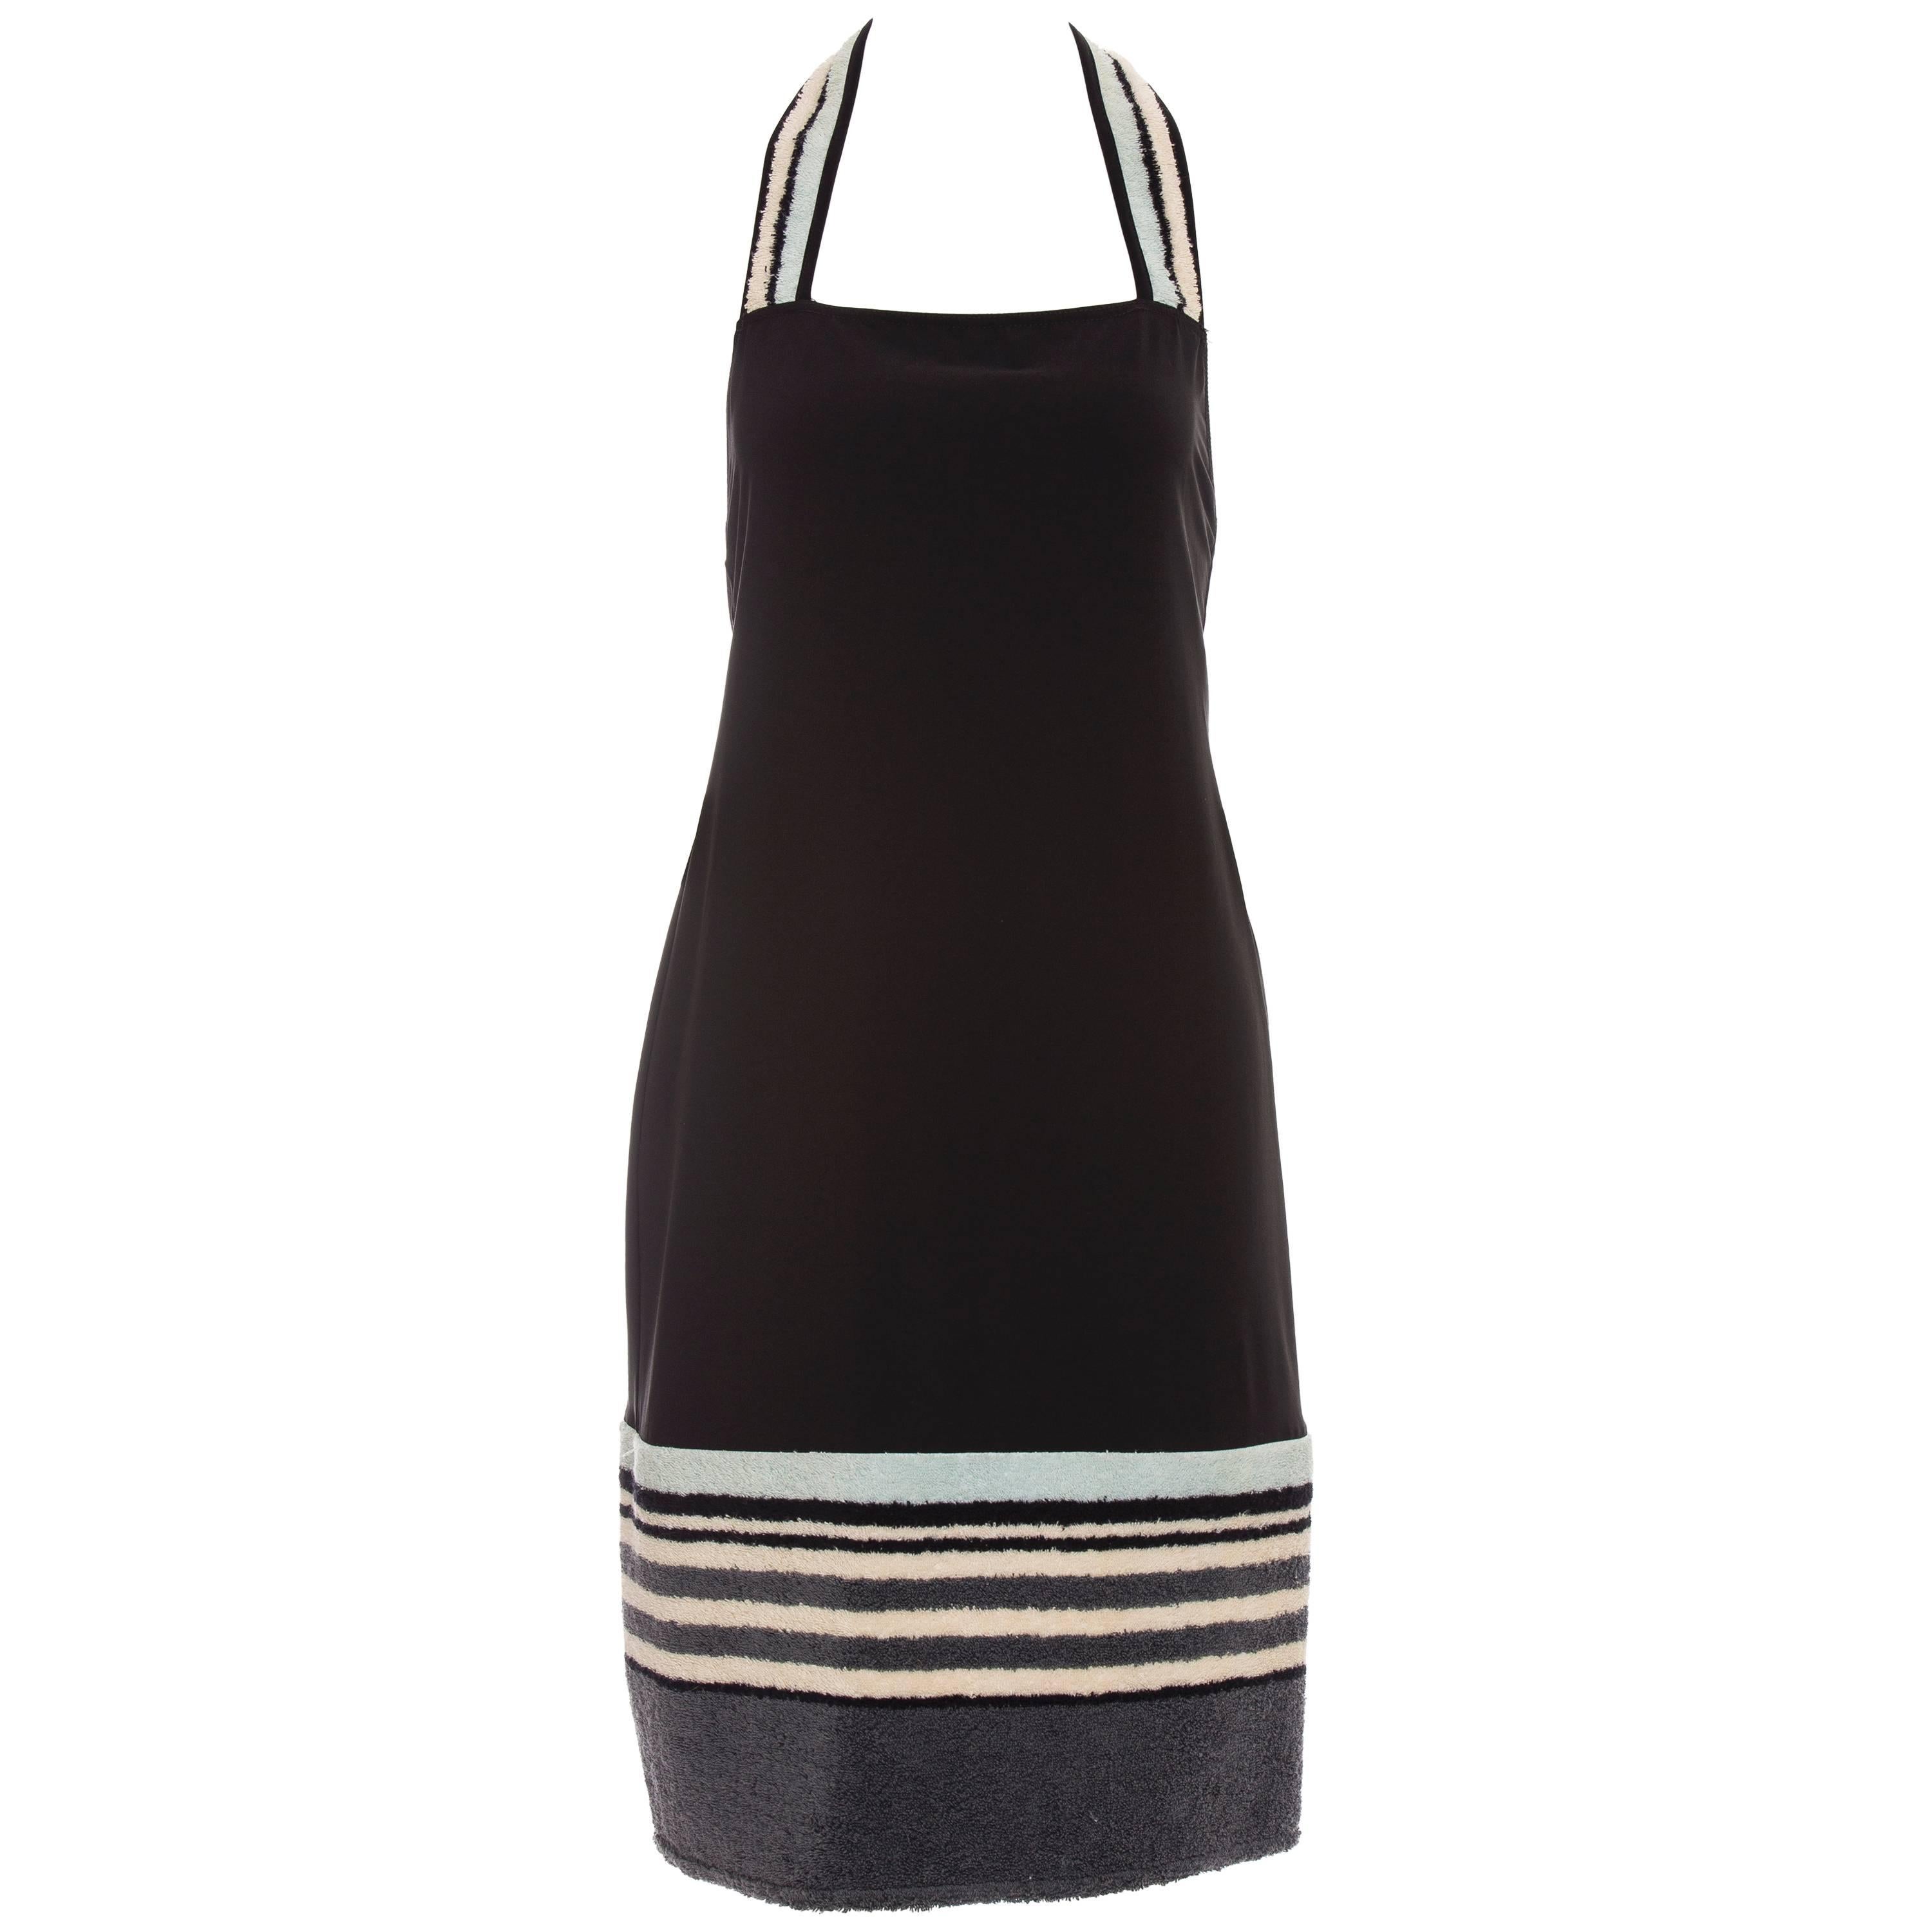 Chanel Black Halter - Dress With Terrycloth Trim, Cruise 2000 For Sale